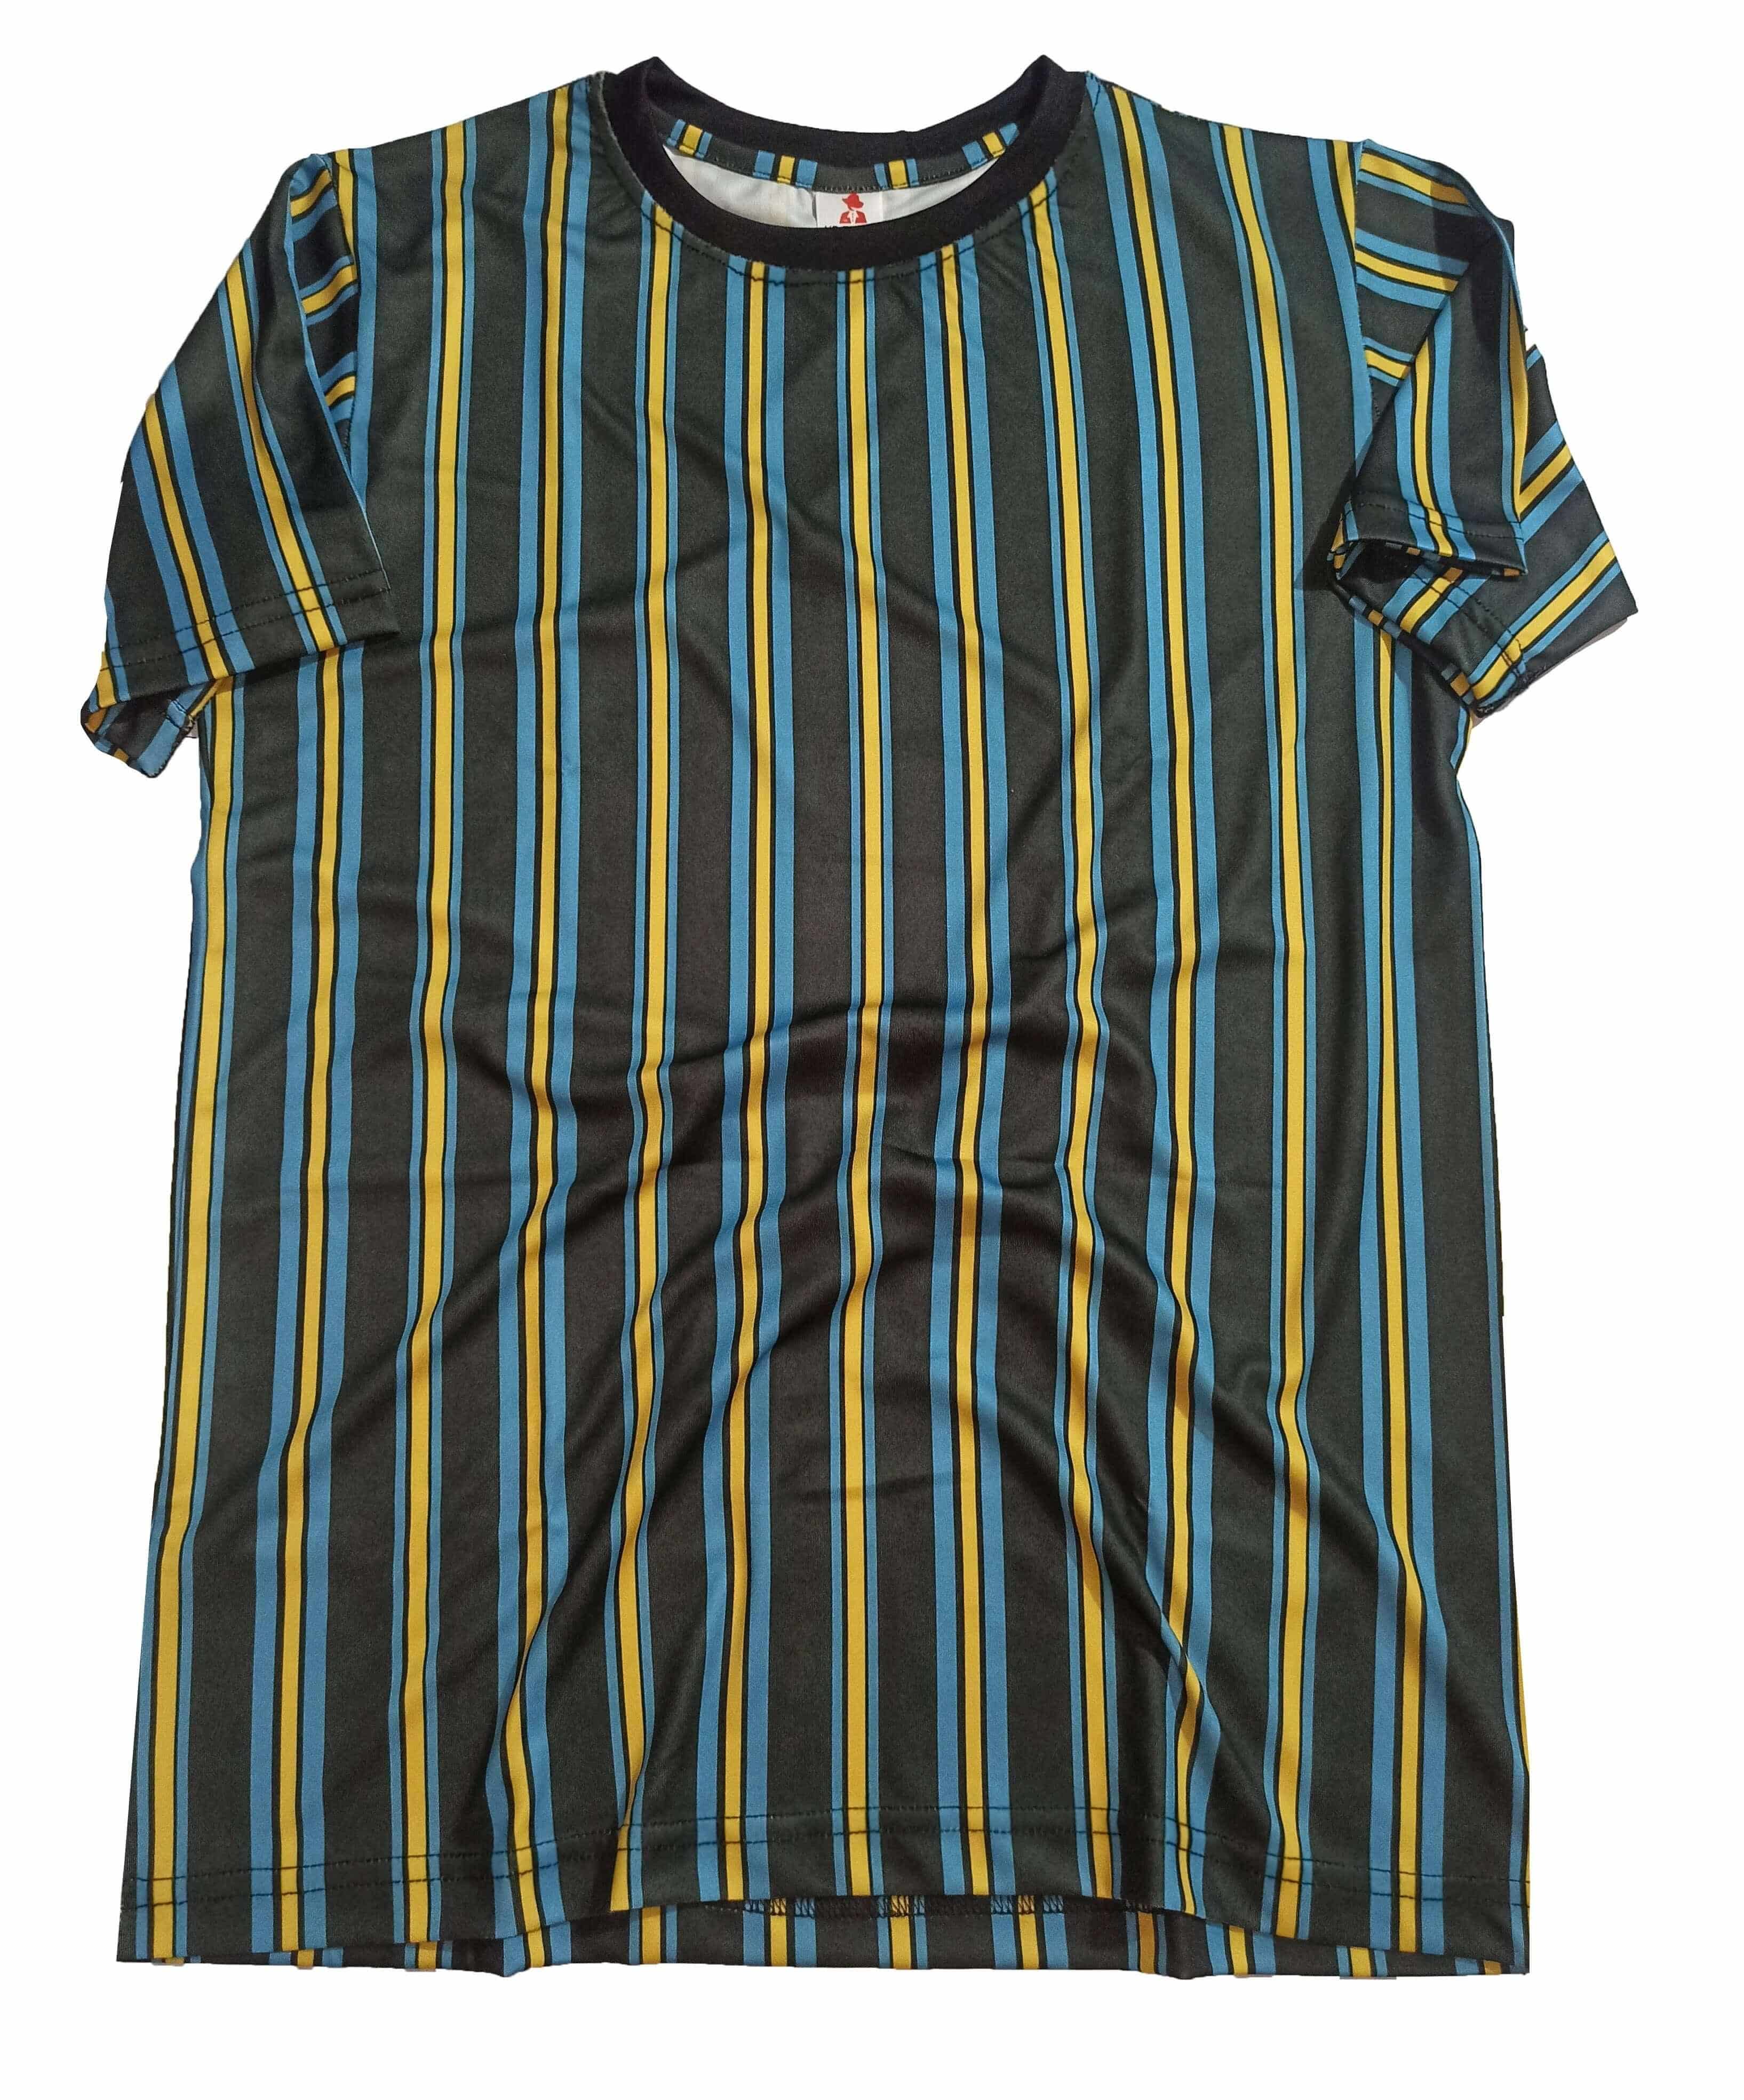 Men's Short Sleeve Striped Printed Multi Color T-Shirts - UD FABRIC - Your Style our Design